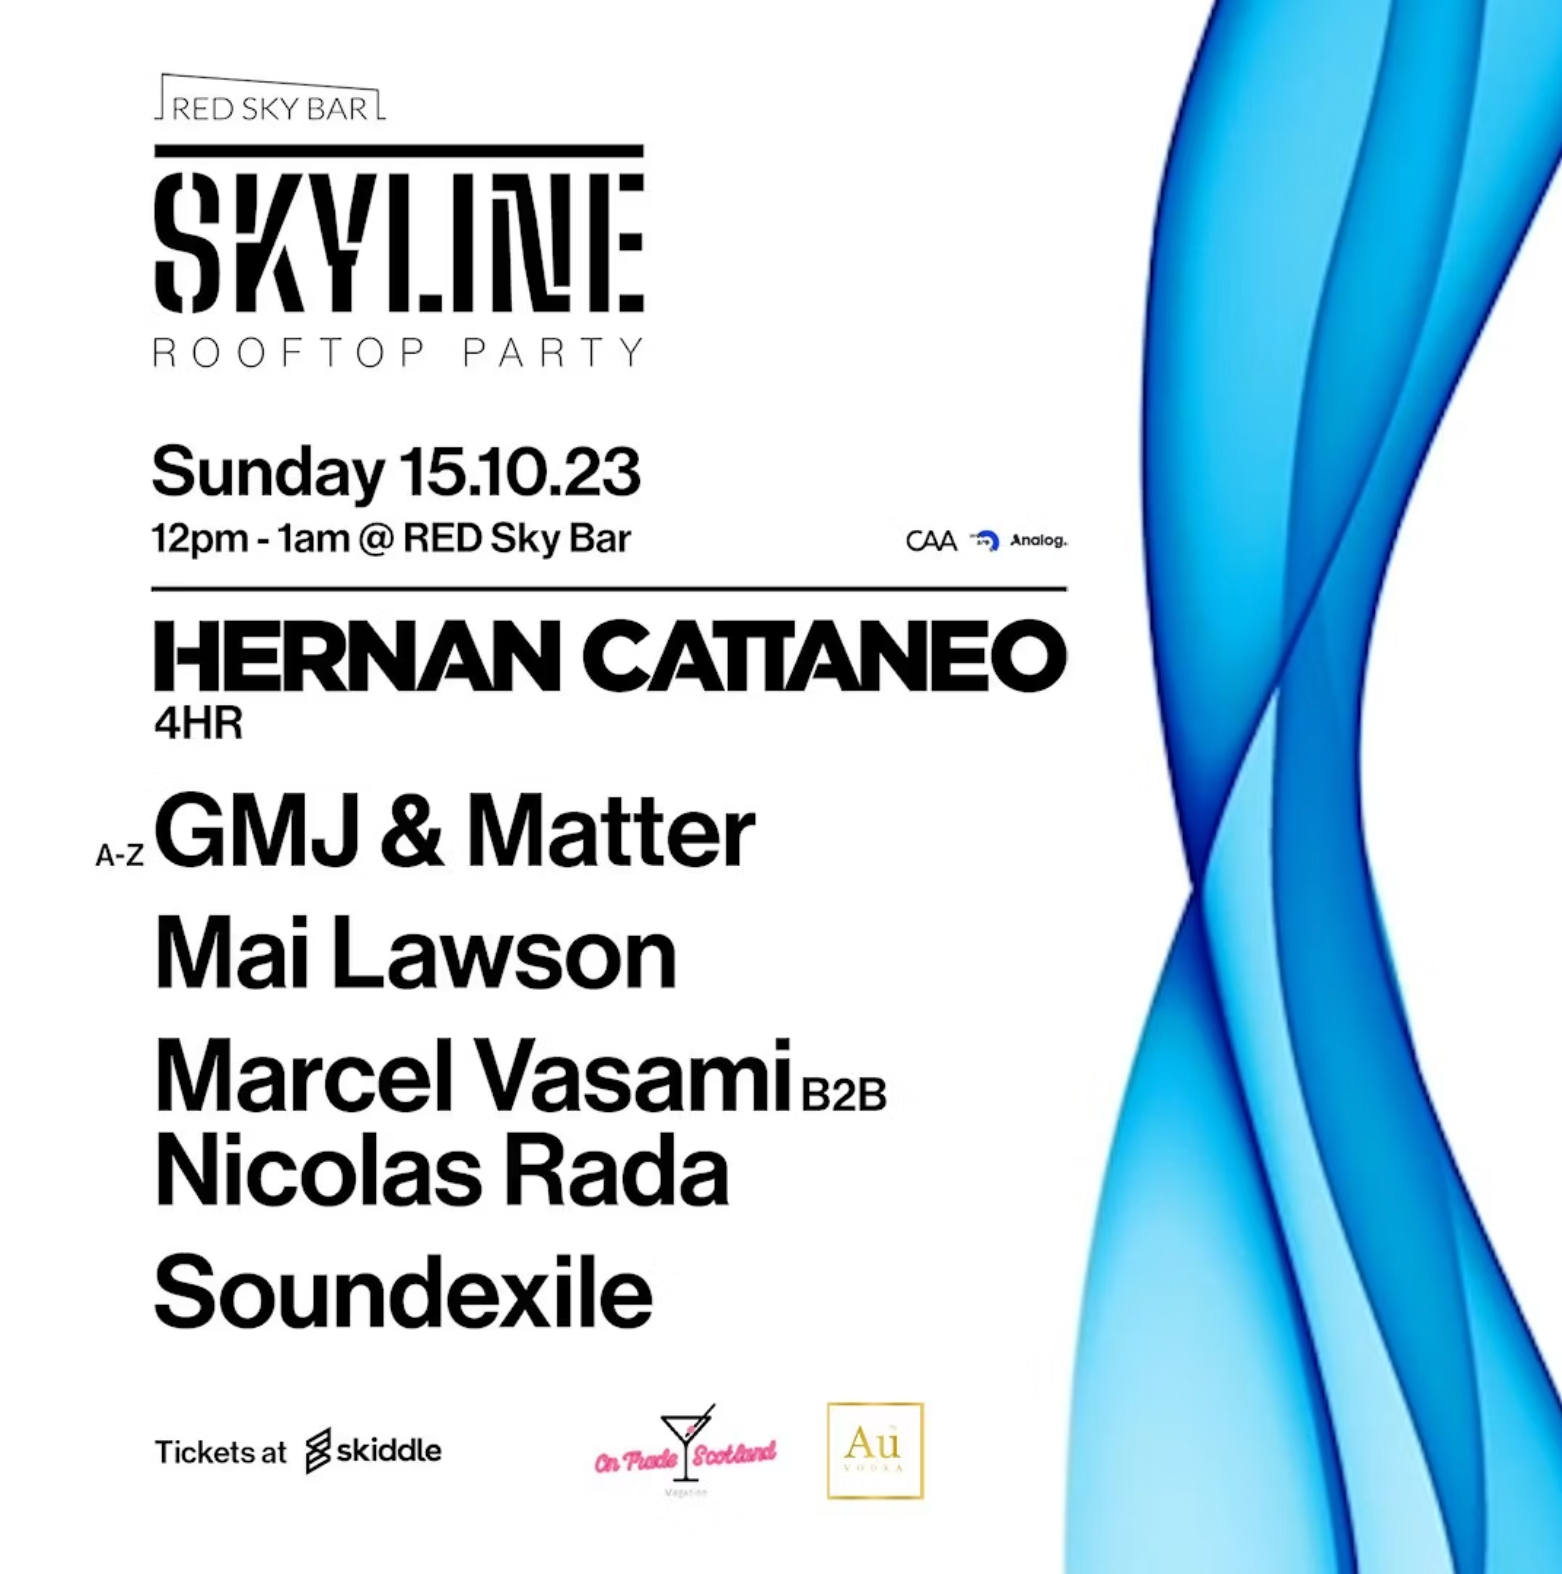 Skyline feat. Hernan Cattaneo, Soundexile & much more - フライヤー表